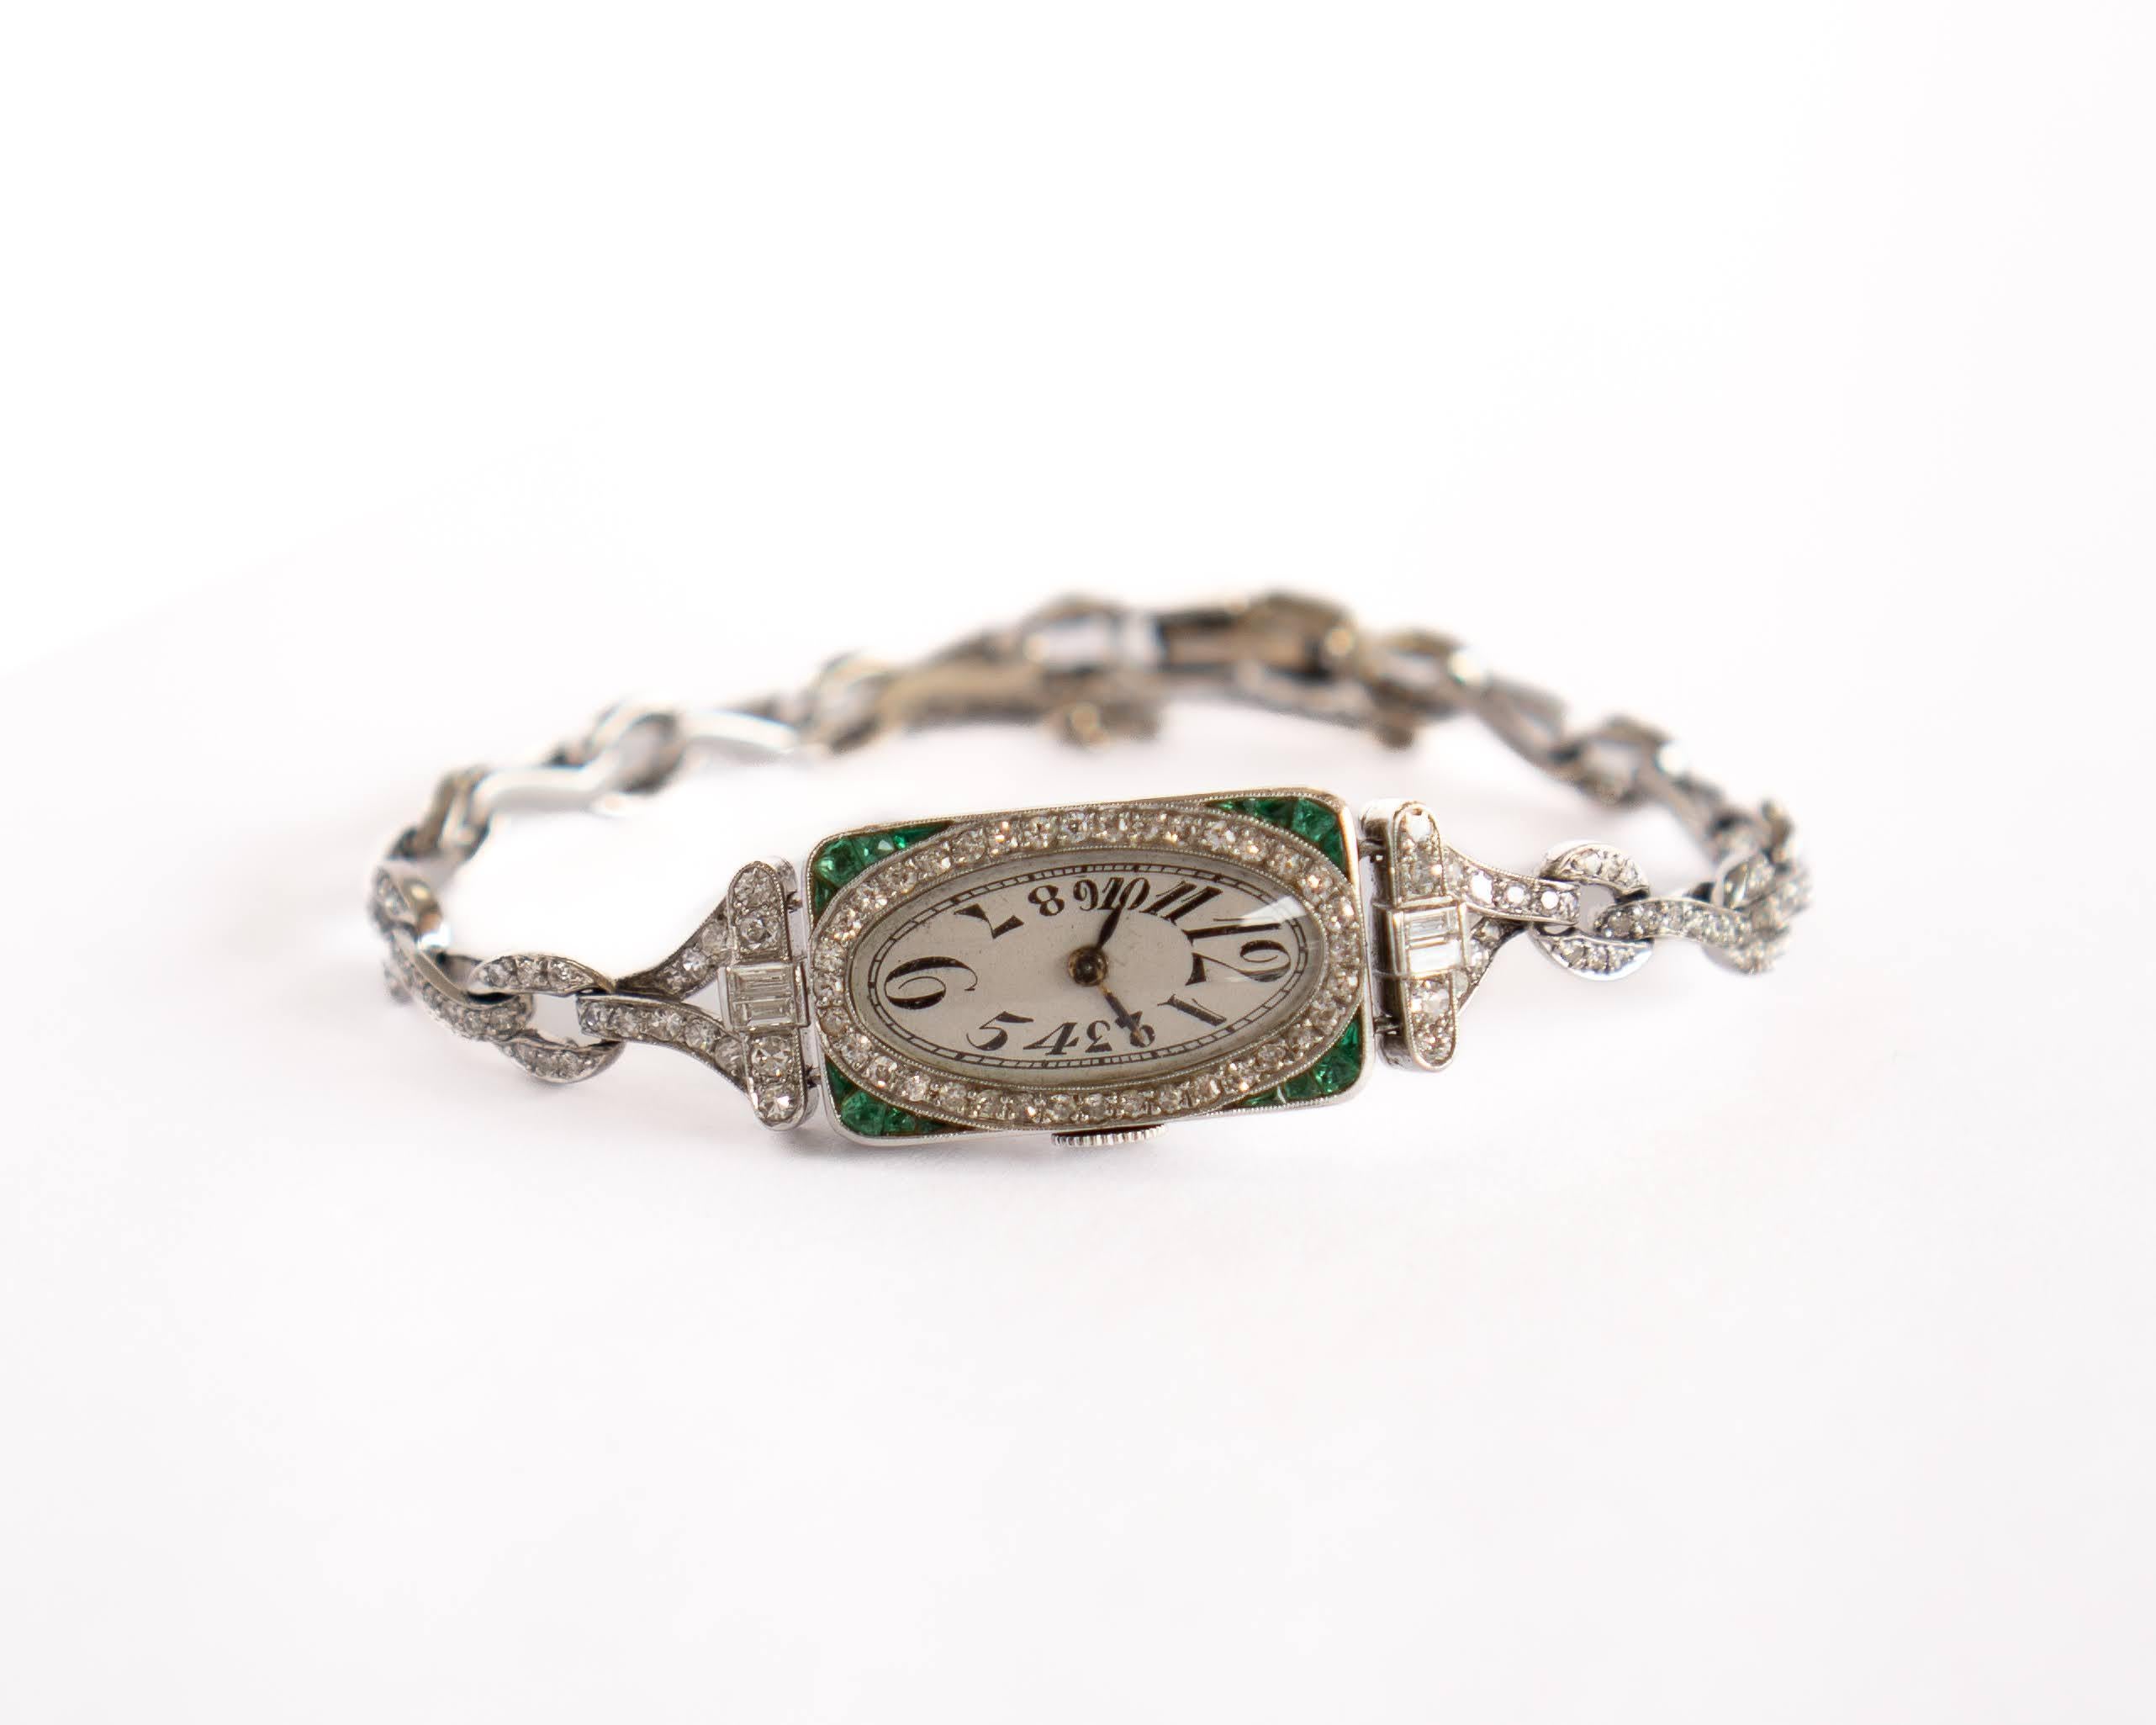 This Haas Neveux Lady's platinum vintage watch has a 14k white gold link-style bracelet with a white gold diamond case frame and natural emerald gemstone corners. This piece features 197 round bezel settings, 4 rectangular channel settings and 16